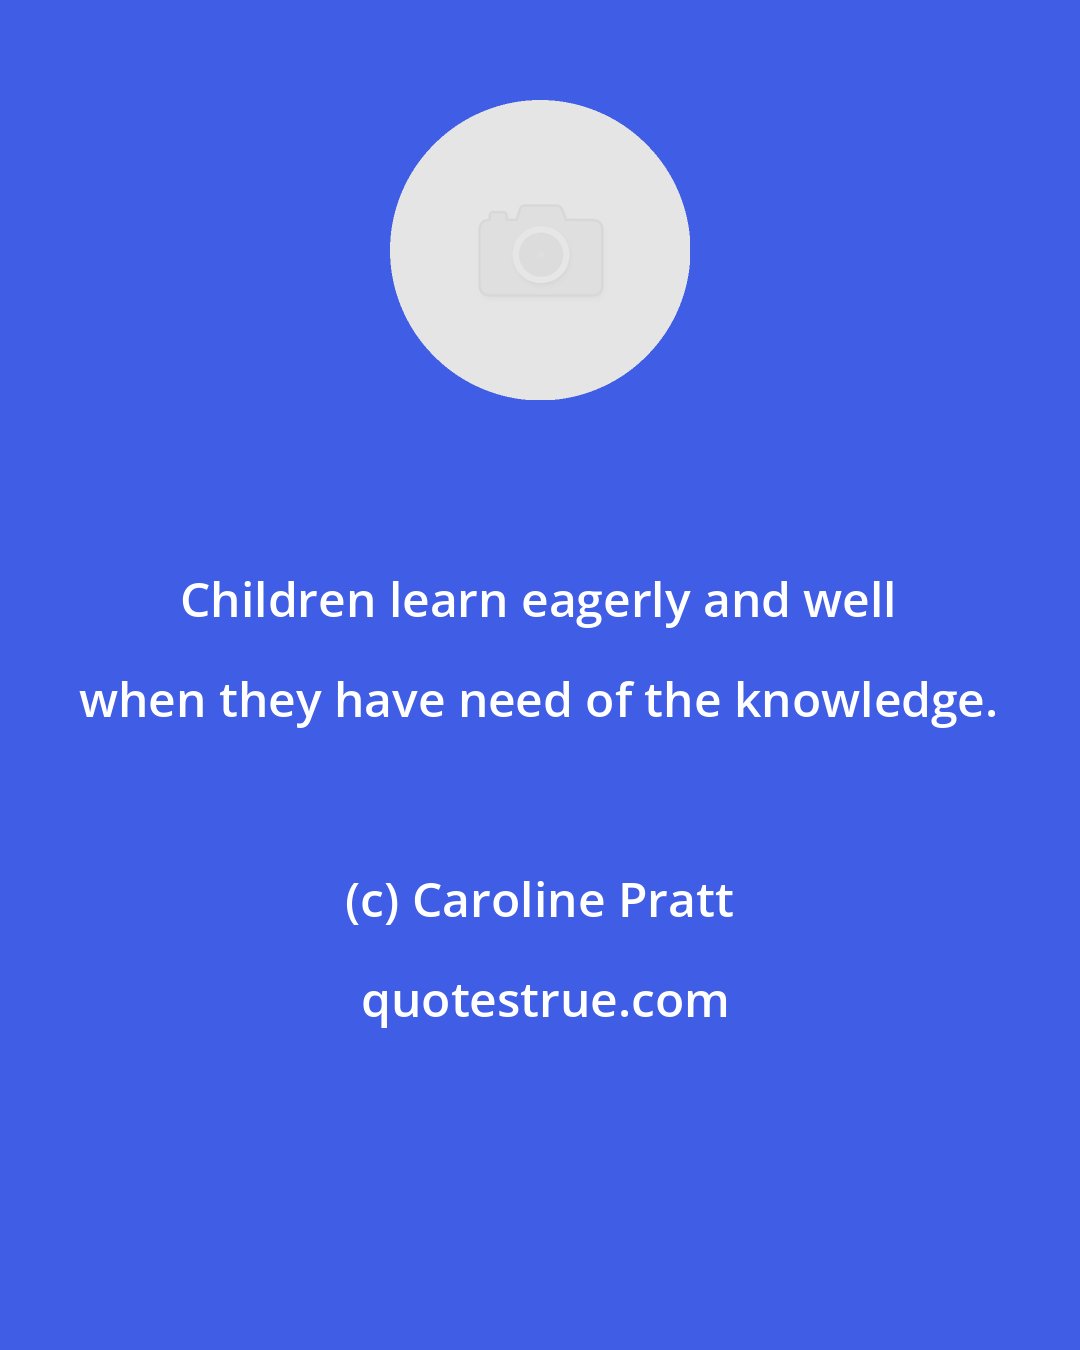 Caroline Pratt: Children learn eagerly and well when they have need of the knowledge.